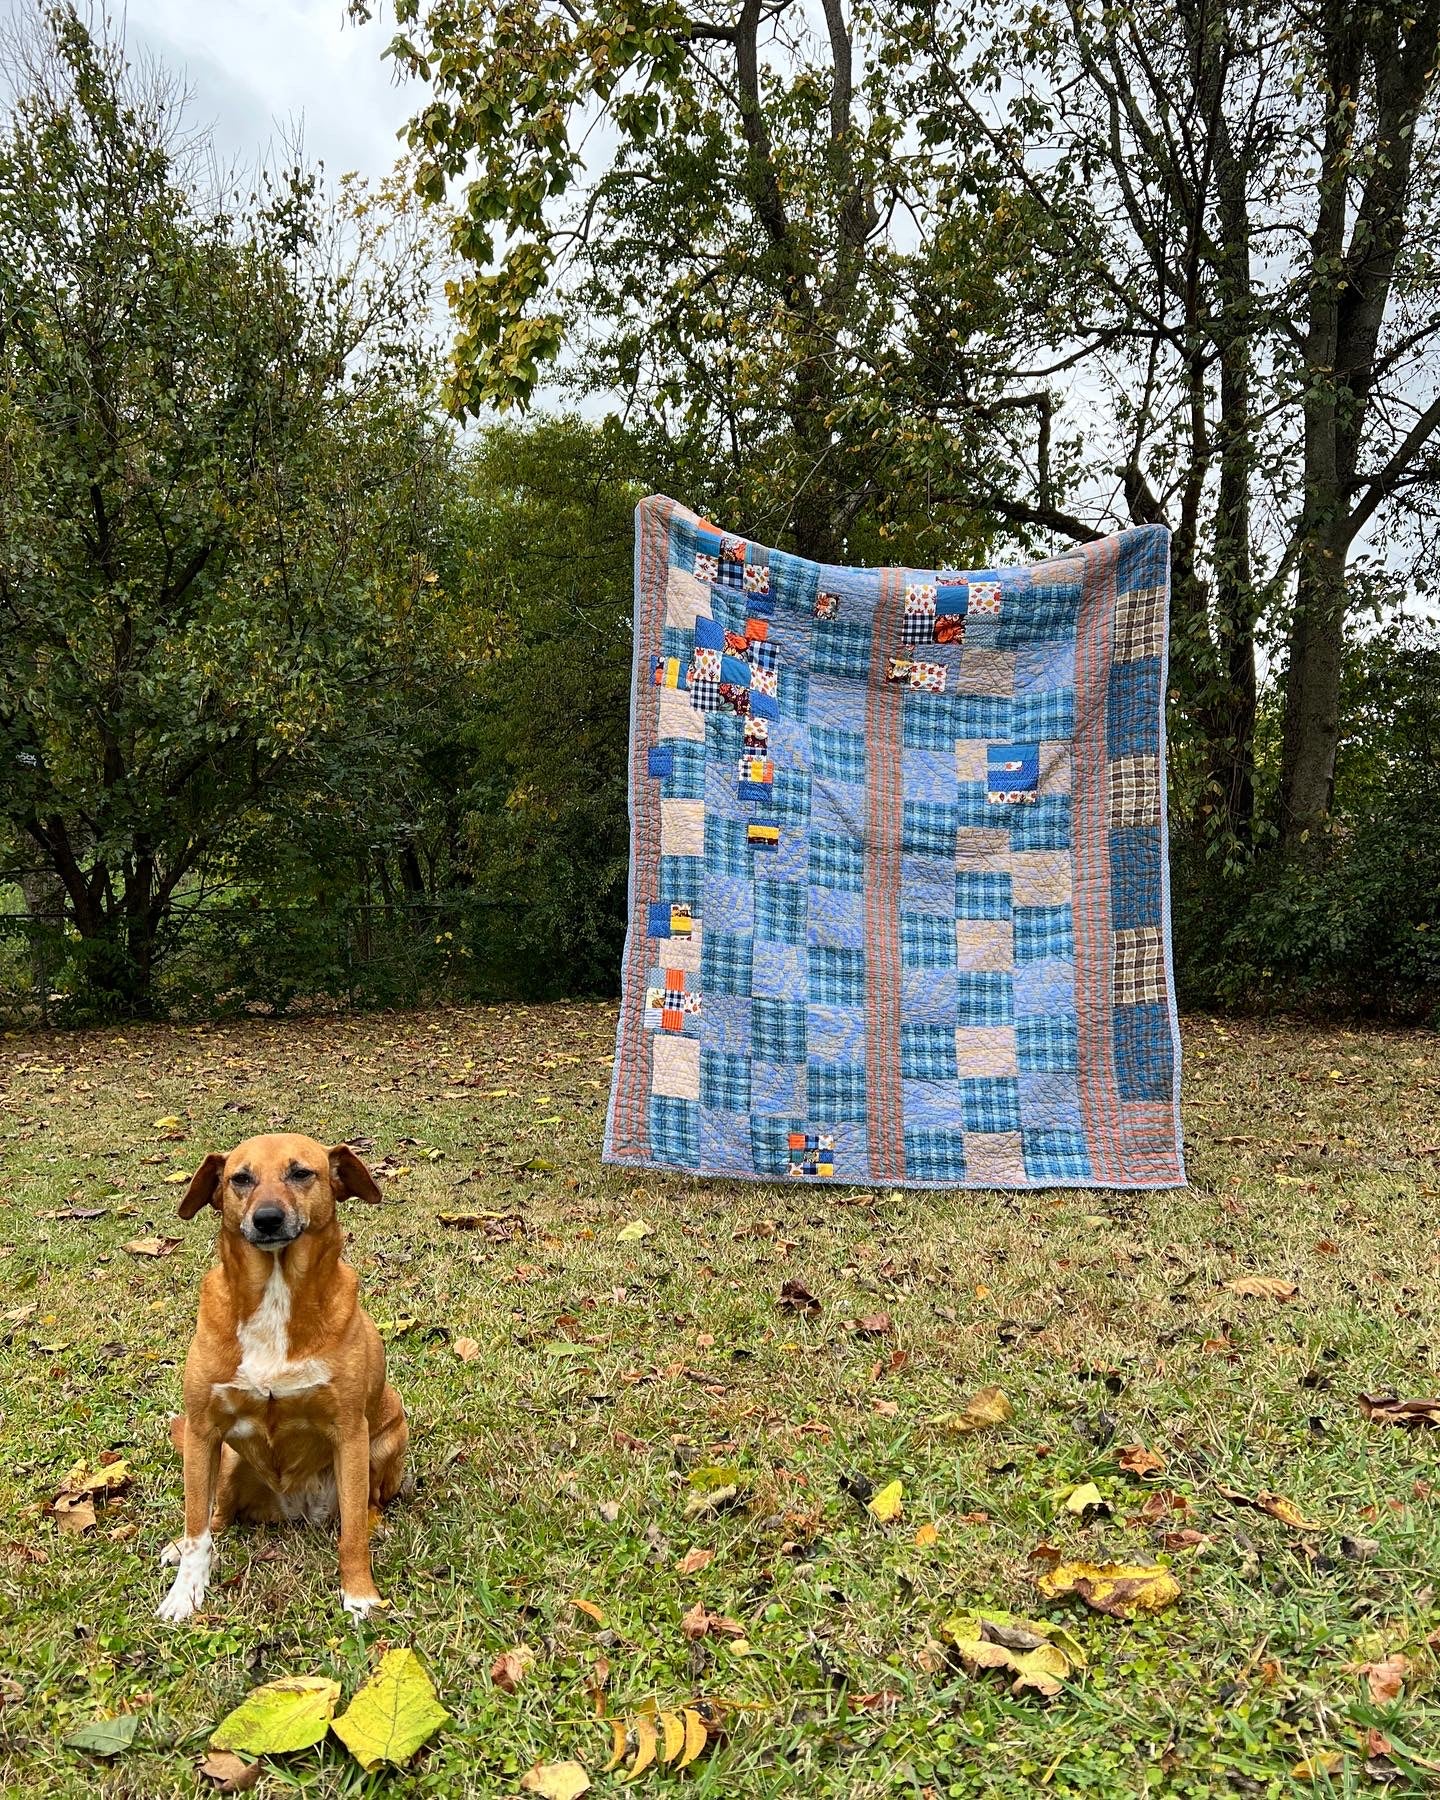 autumn blues quilt with odessa the dog in foreground on lawn with autumn leaves strewn about